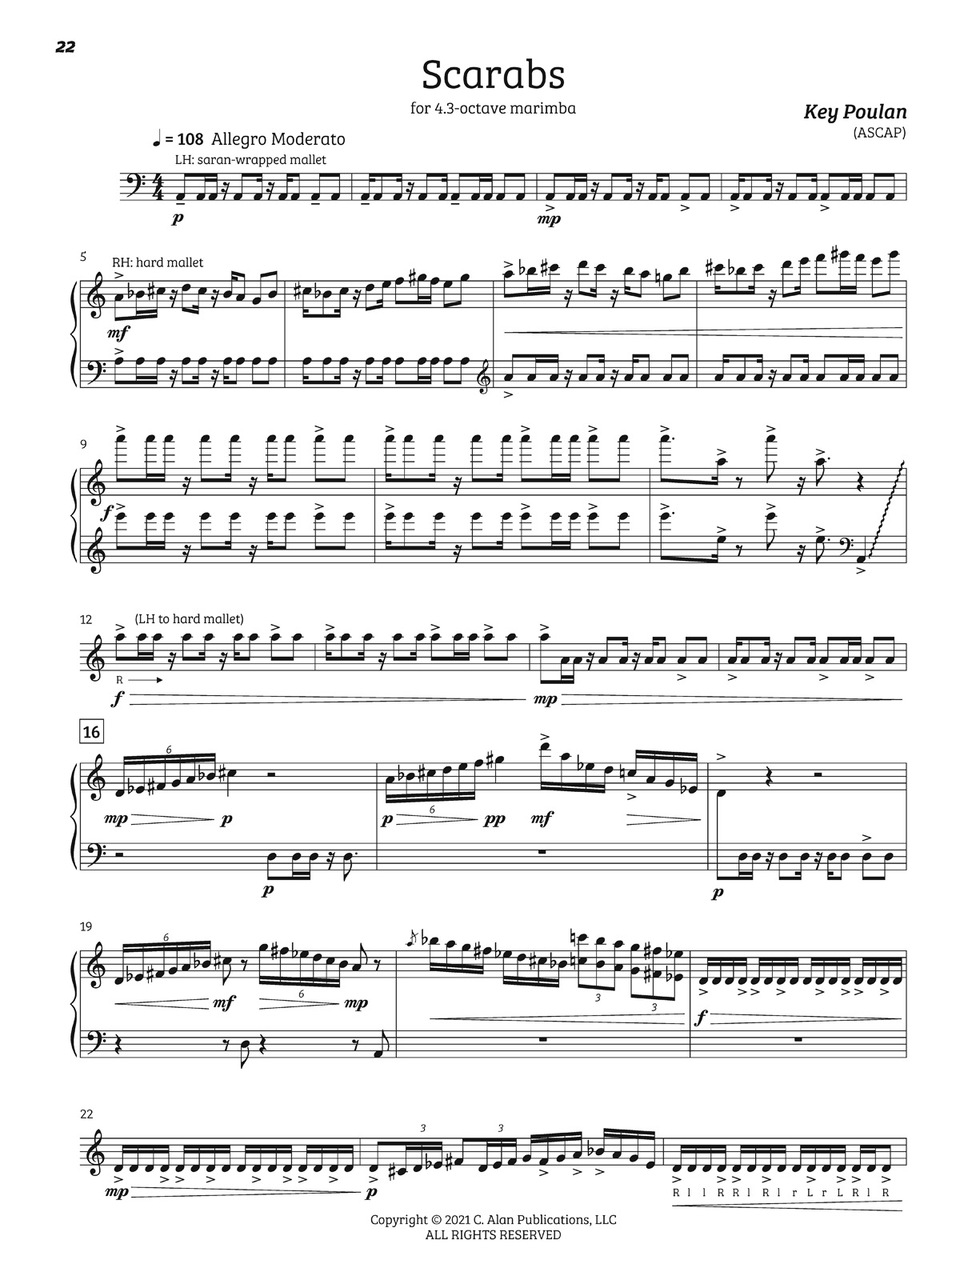 Lion's Roar, The (11 Sequential Intermediate Solos for Marimba)